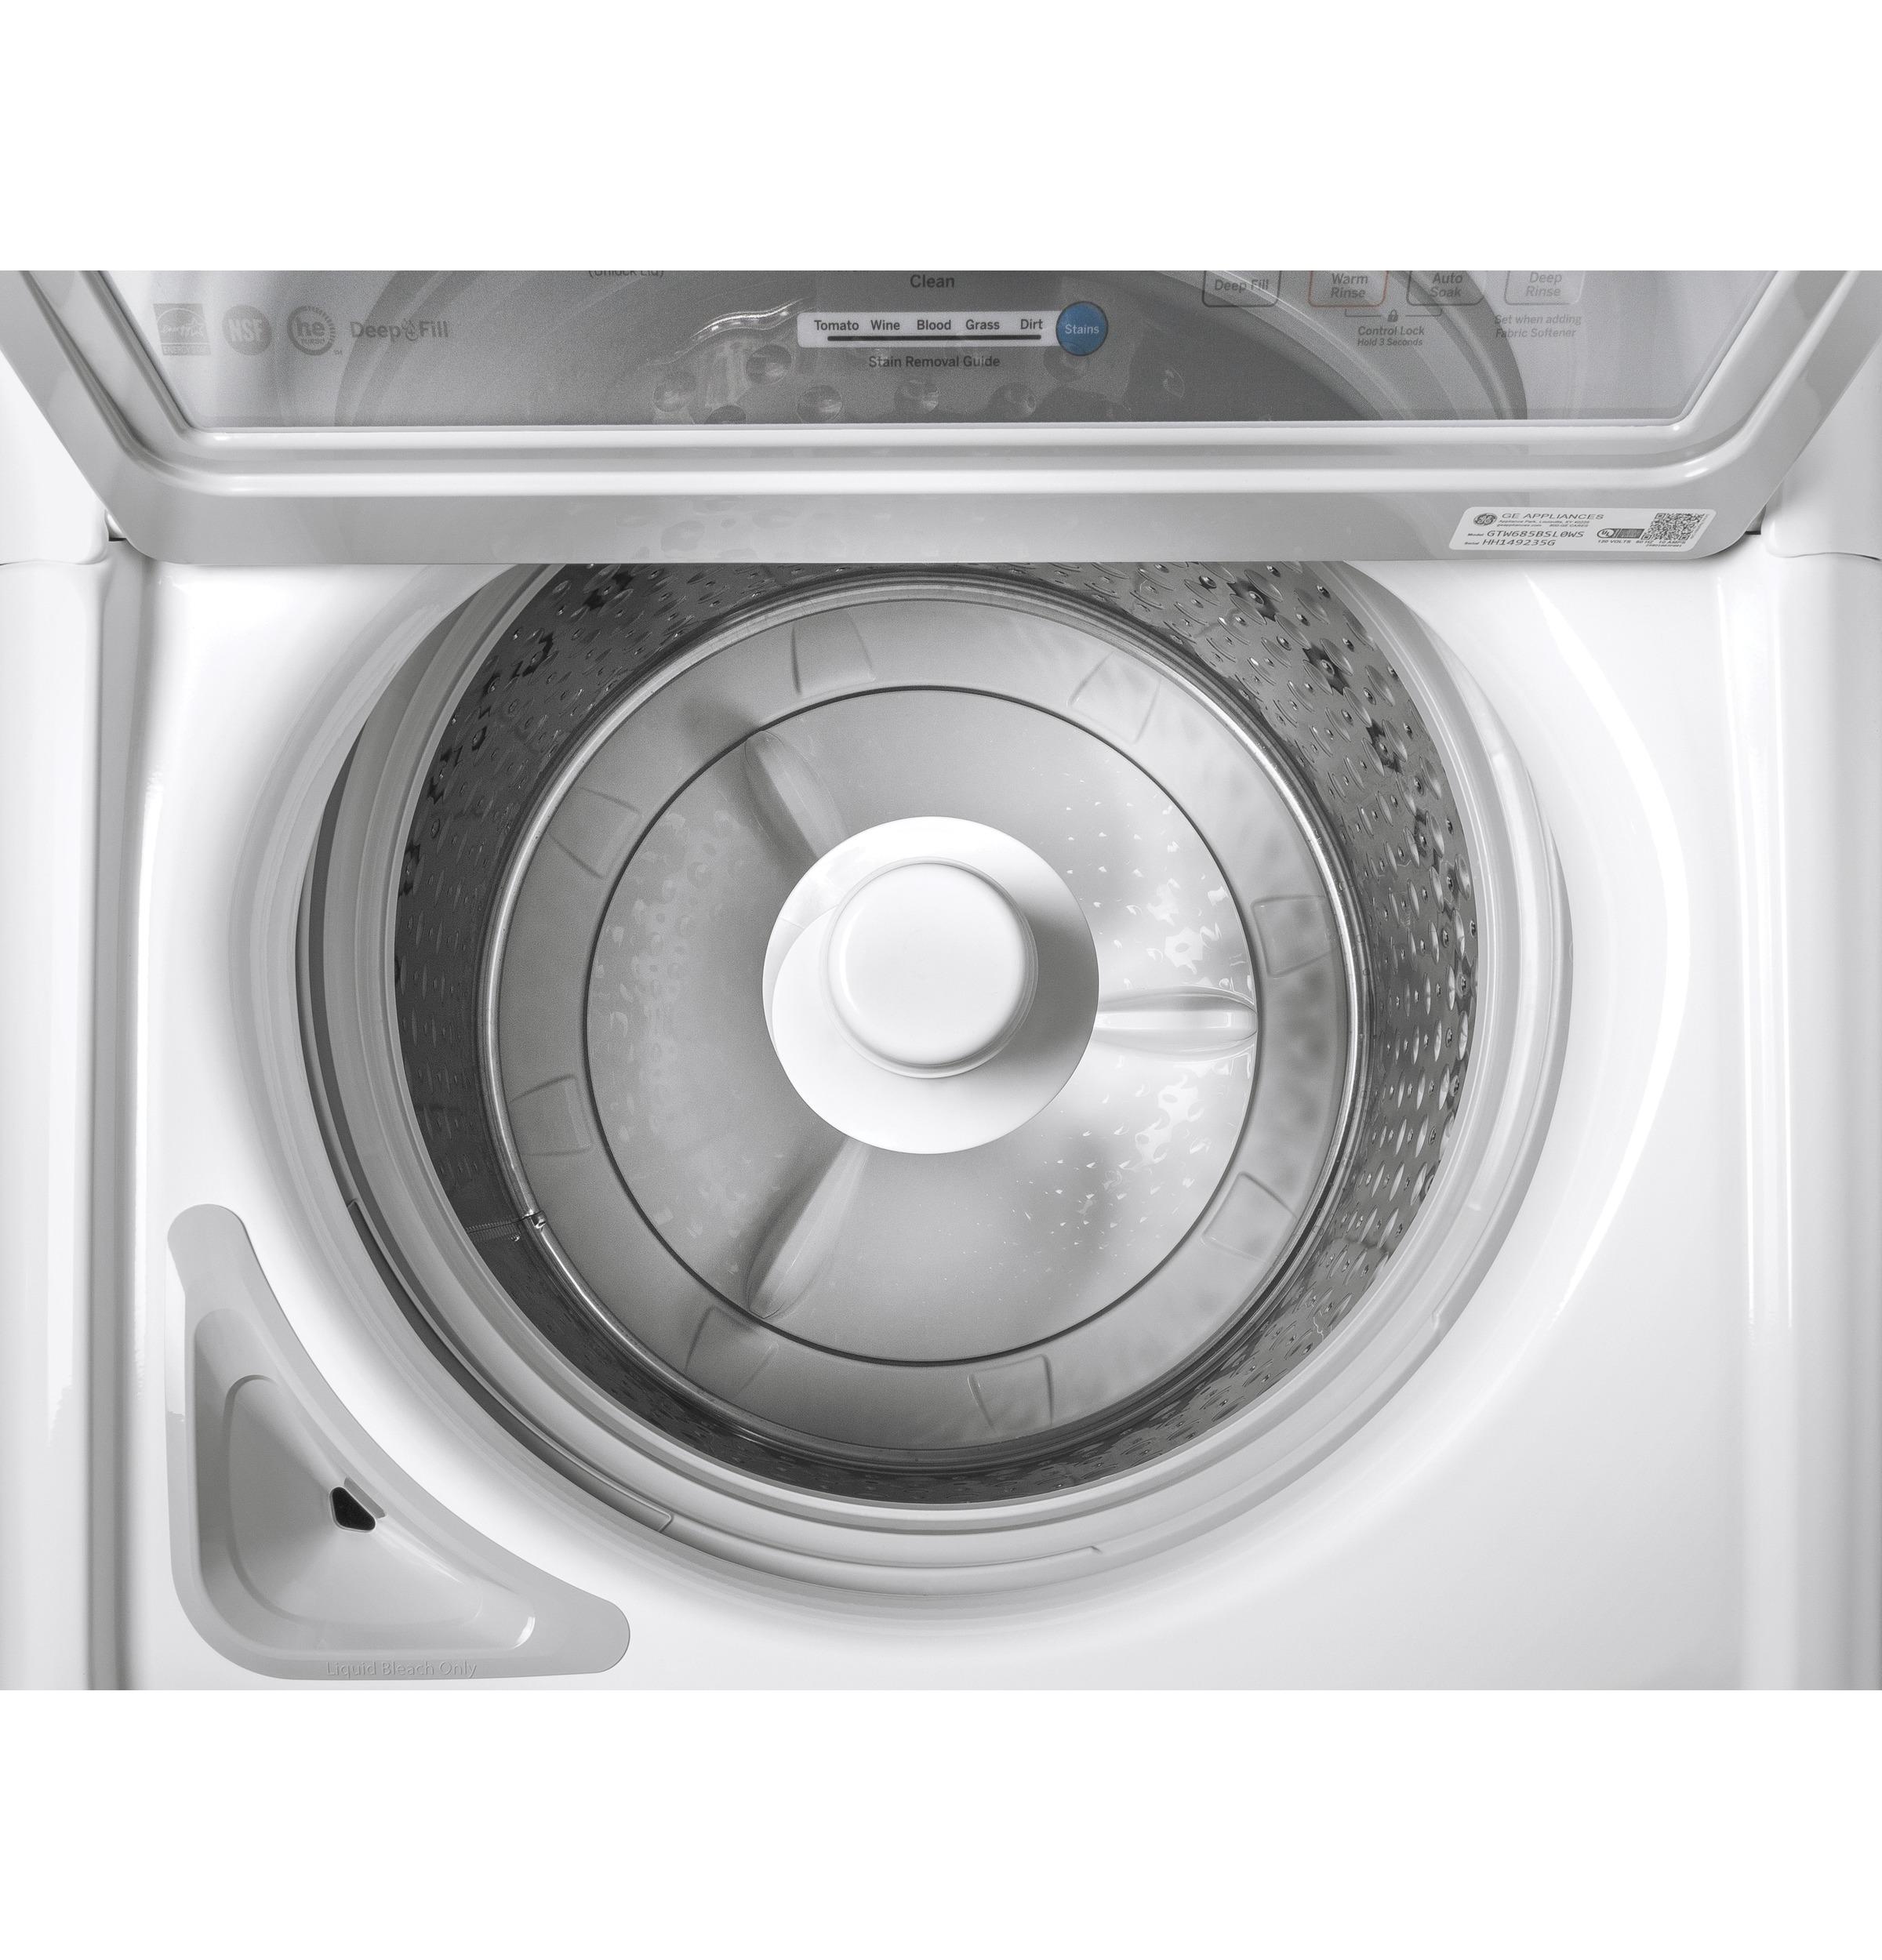 GE® ENERGY STAR® 4.5 cu. ft. Capacity Washer with Stainless Steel Basket